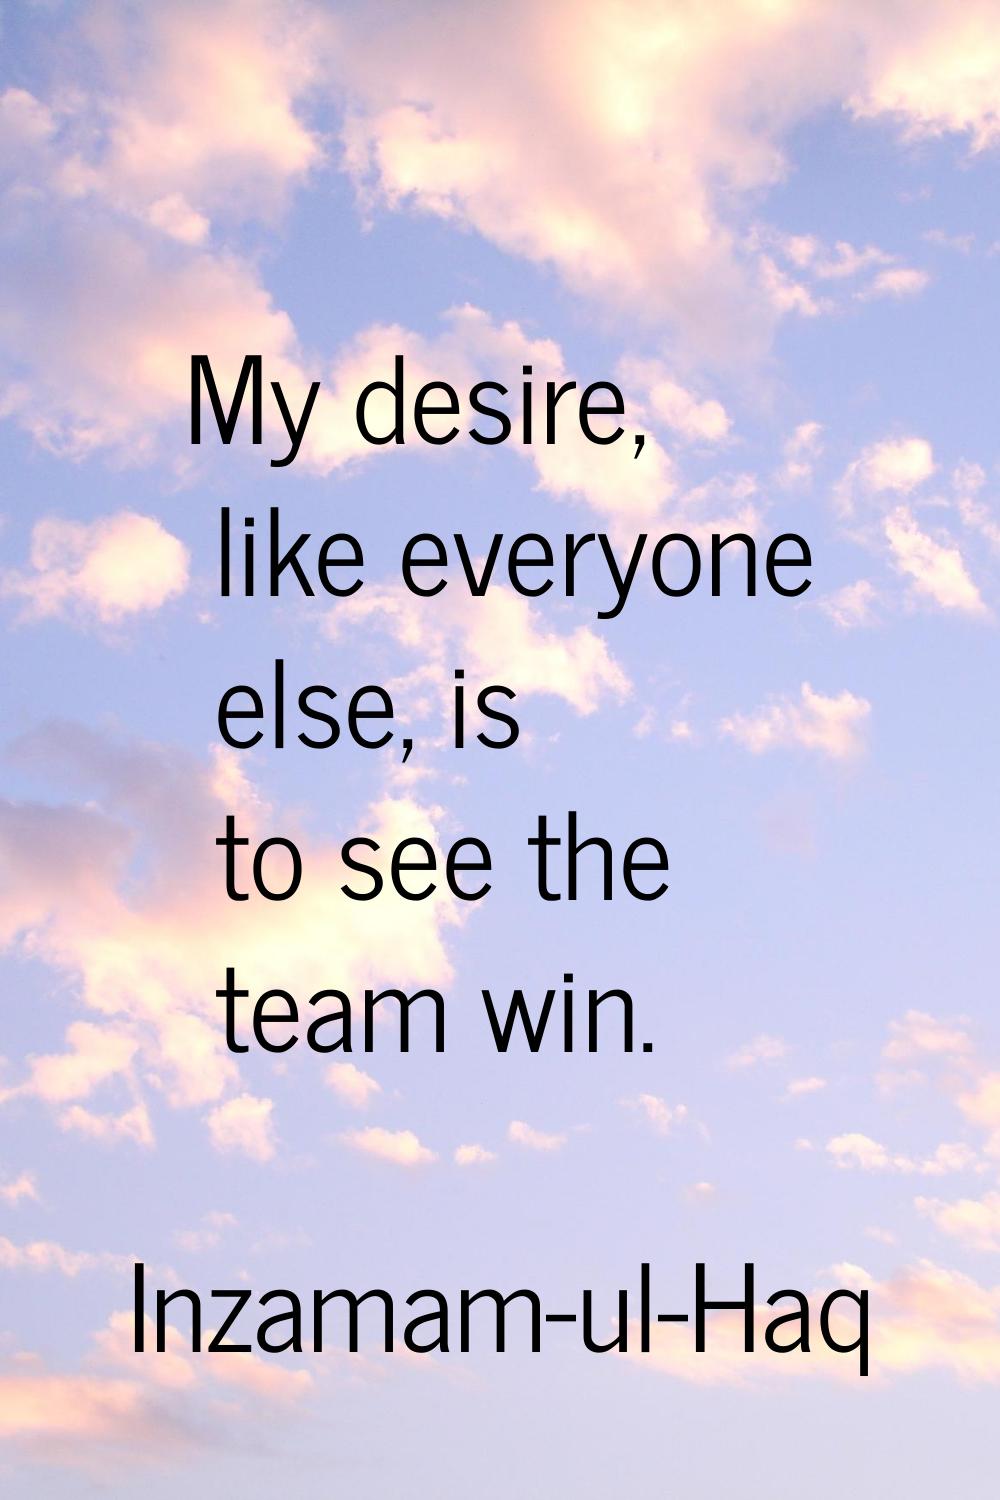 My desire, like everyone else, is to see the team win.